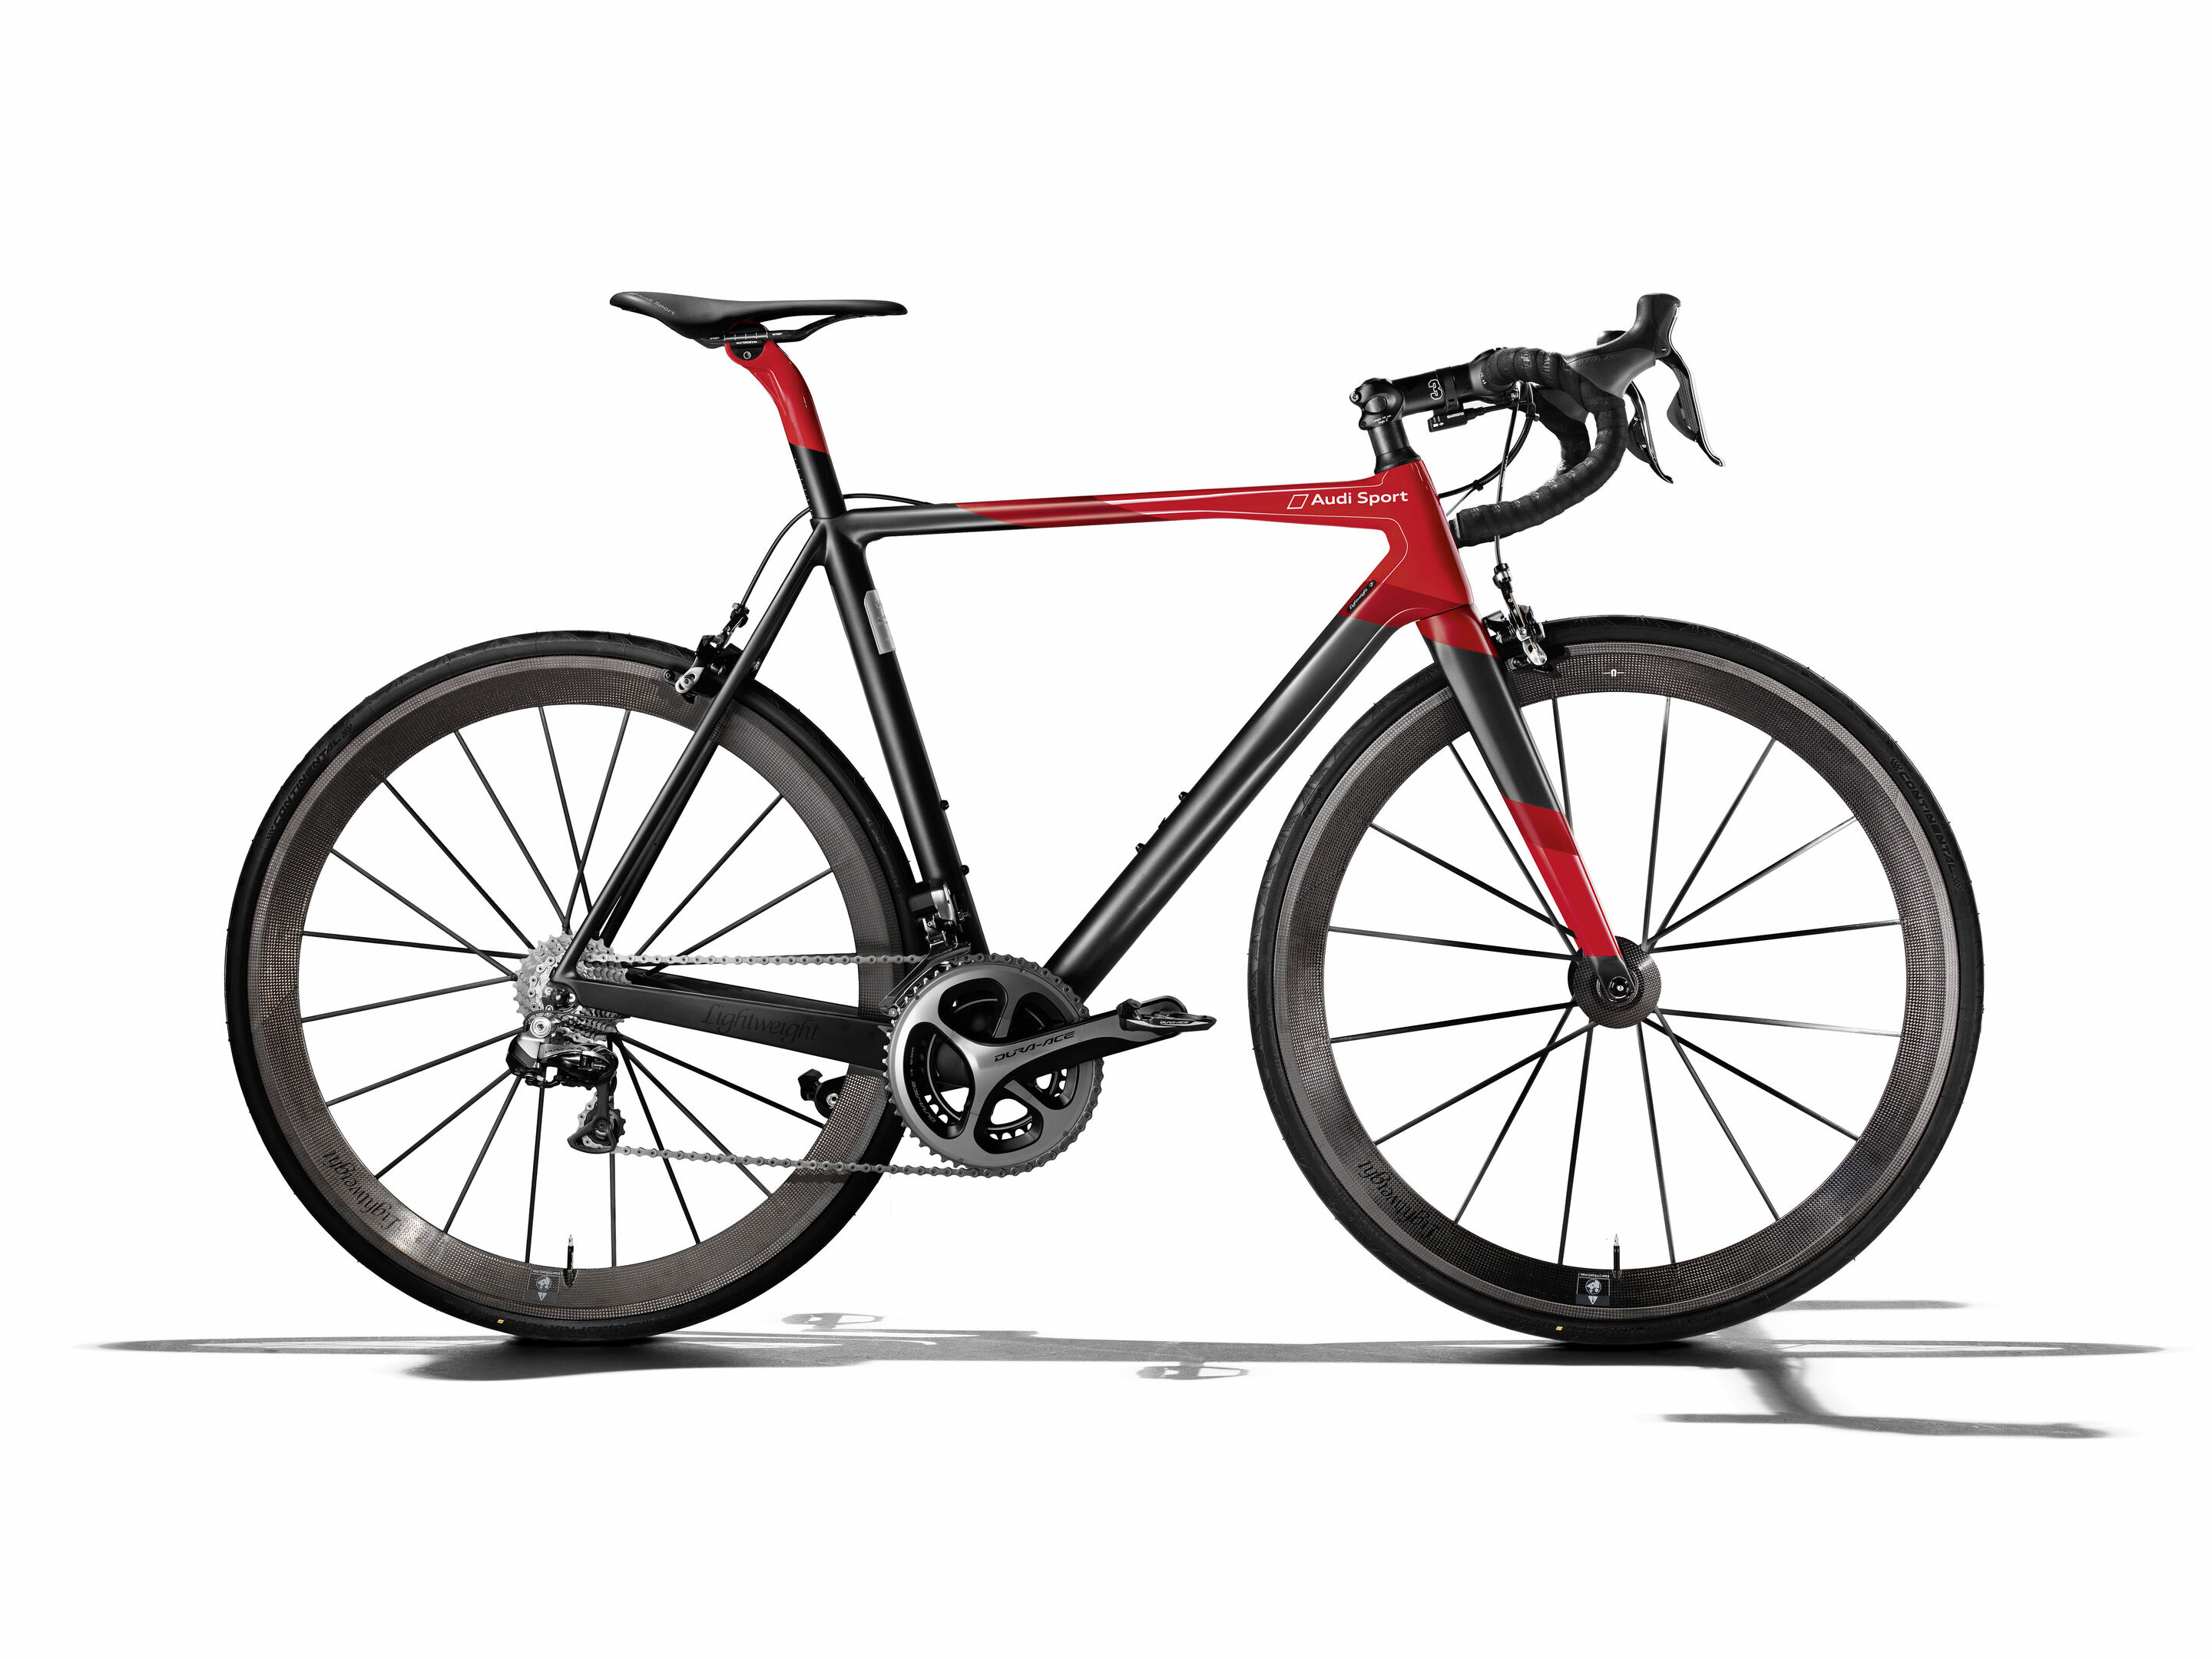 Audi presents the first racing bike made of carbon